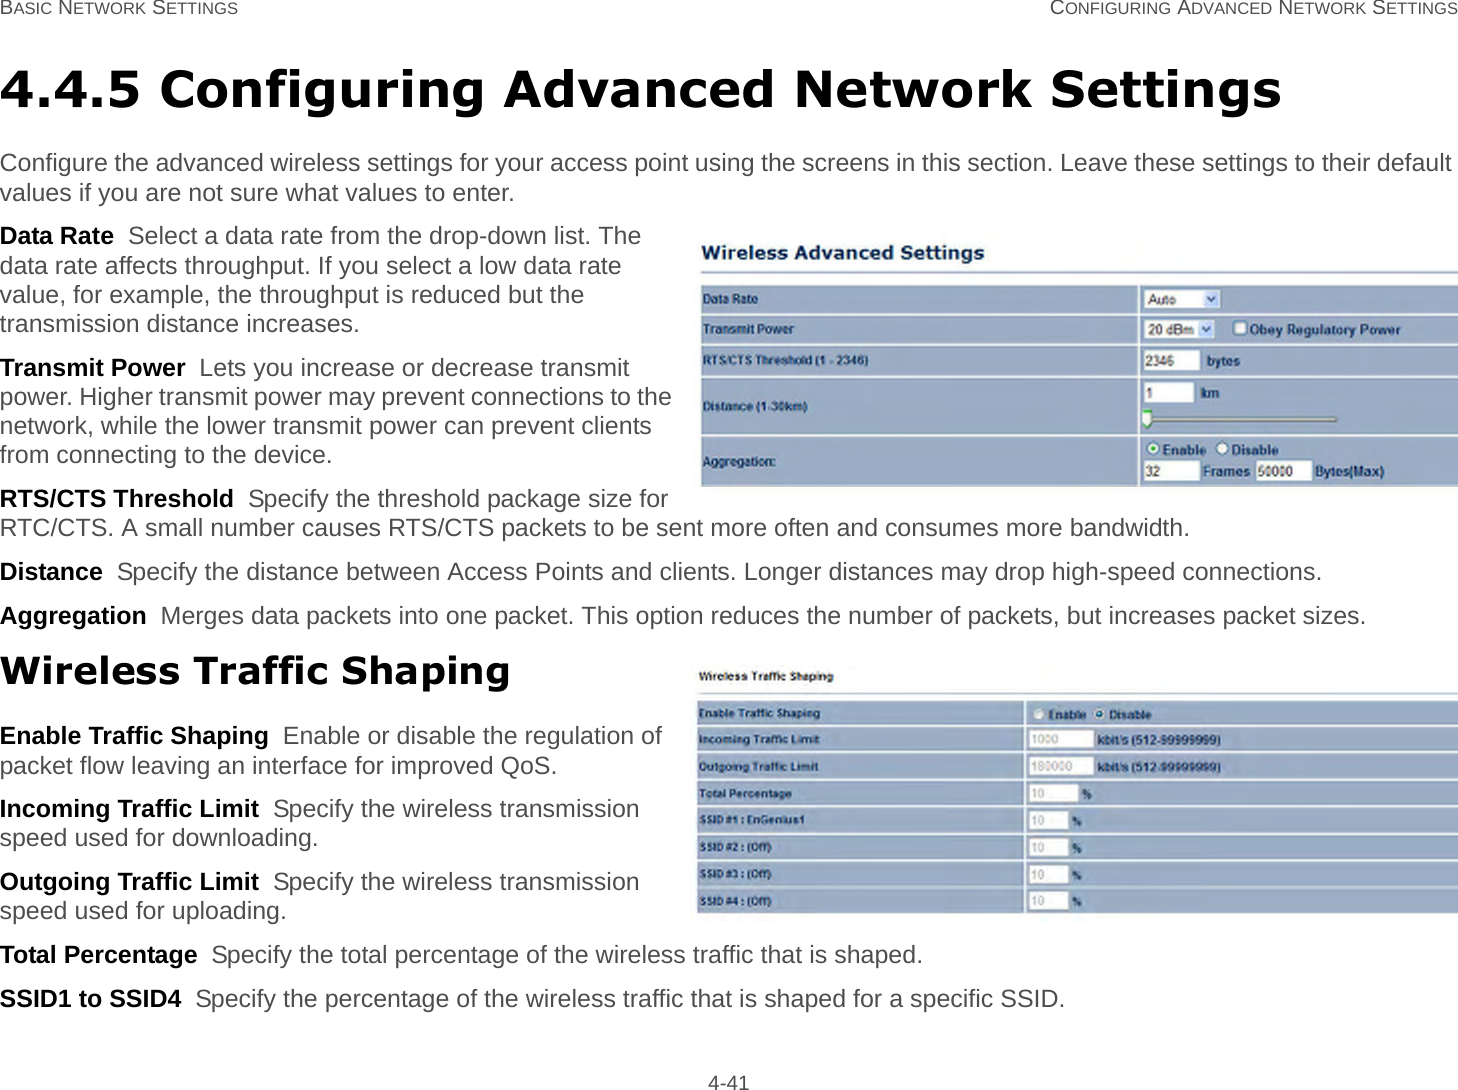 BASIC NETWORK SETTINGS CONFIGURING ADVANCED NETWORK SETTINGS 4-414.4.5 Configuring Advanced Network SettingsConfigure the advanced wireless settings for your access point using the screens in this section. Leave these settings to their default values if you are not sure what values to enter.Data Rate  Select a data rate from the drop-down list. The data rate affects throughput. If you select a low data rate value, for example, the throughput is reduced but the transmission distance increases.Transmit Power  Lets you increase or decrease transmit power. Higher transmit power may prevent connections to the network, while the lower transmit power can prevent clients from connecting to the device.RTS/CTS Threshold  Specify the threshold package size for RTC/CTS. A small number causes RTS/CTS packets to be sent more often and consumes more bandwidth.Distance  Specify the distance between Access Points and clients. Longer distances may drop high-speed connections.Aggregation  Merges data packets into one packet. This option reduces the number of packets, but increases packet sizes.Wireless Traffic ShapingEnable Traffic Shaping  Enable or disable the regulation of packet flow leaving an interface for improved QoS.Incoming Traffic Limit  Specify the wireless transmission speed used for downloading.Outgoing Traffic Limit  Specify the wireless transmission speed used for uploading.Total Percentage  Specify the total percentage of the wireless traffic that is shaped.SSID1 to SSID4  Specify the percentage of the wireless traffic that is shaped for a specific SSID.